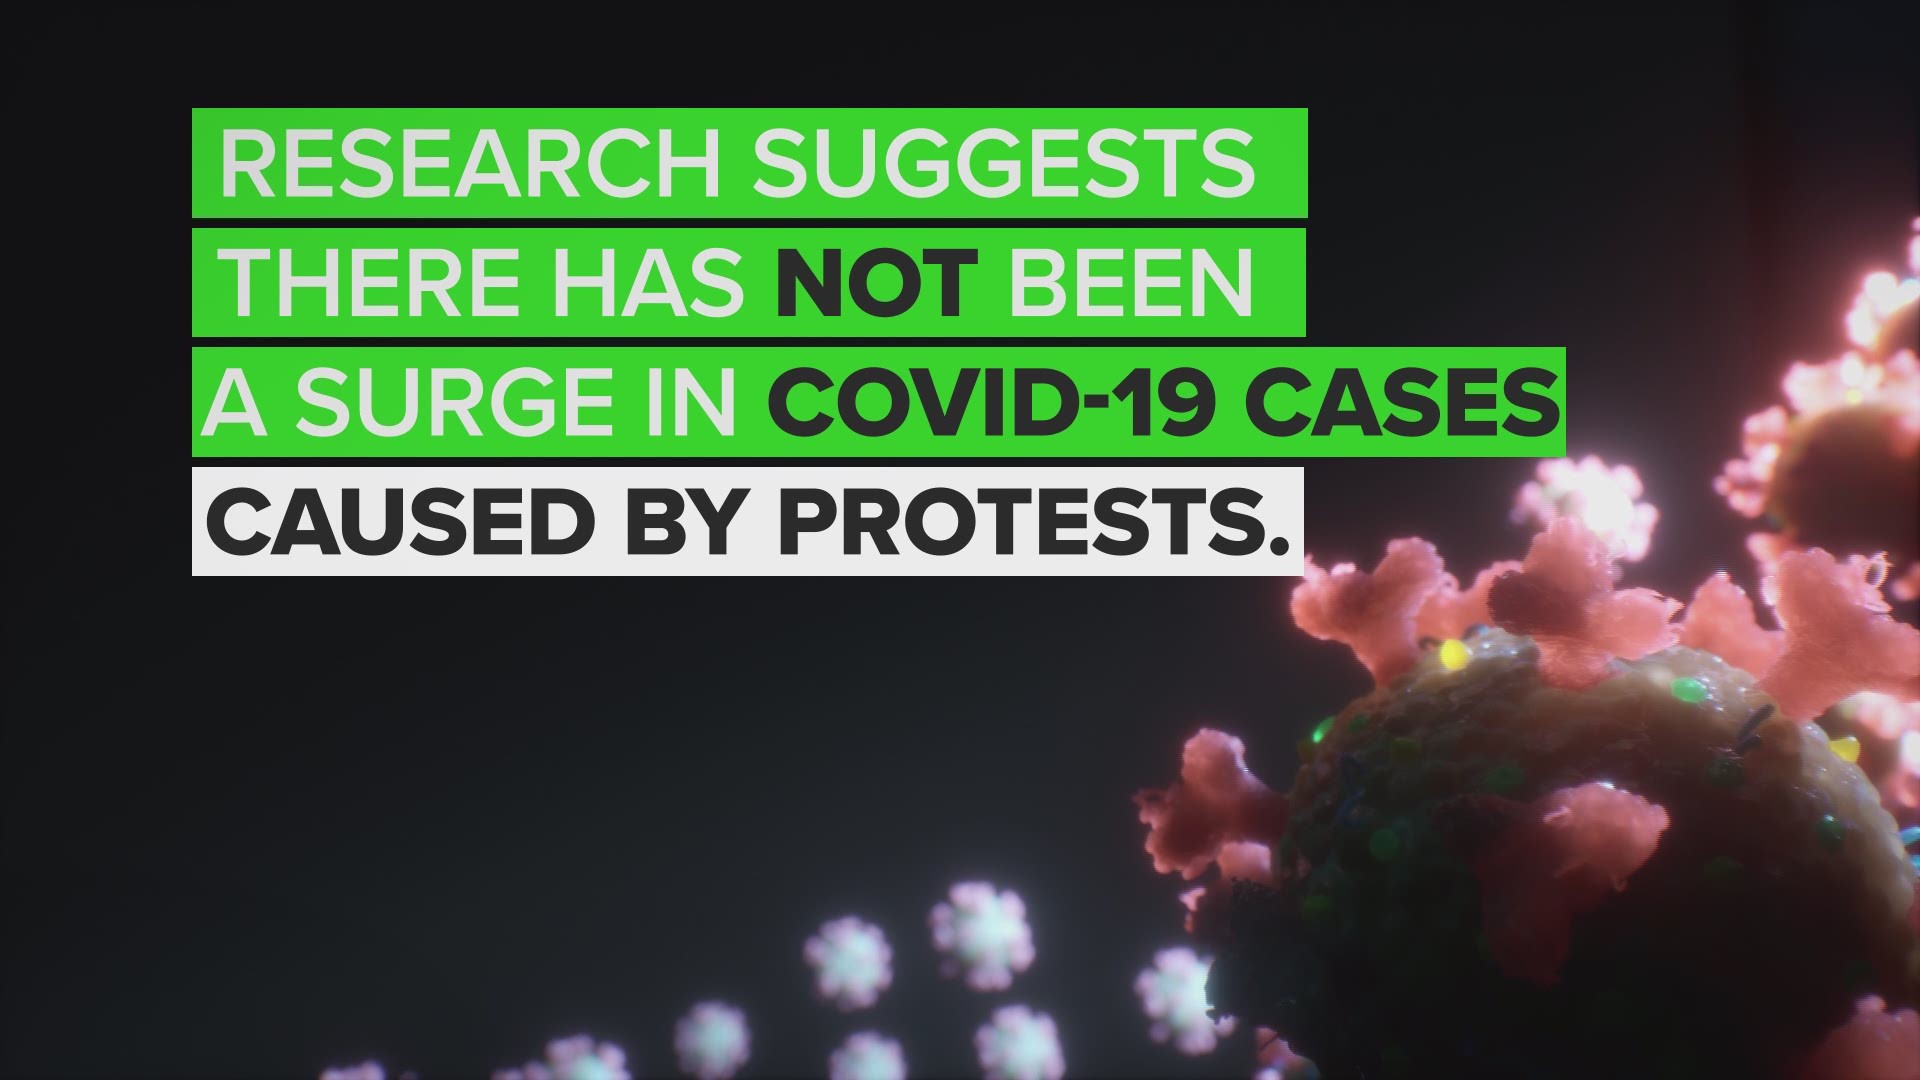 Researchers found people not participating in protests stayed at home, therefore social distancing, whenever there were large protests in their area.